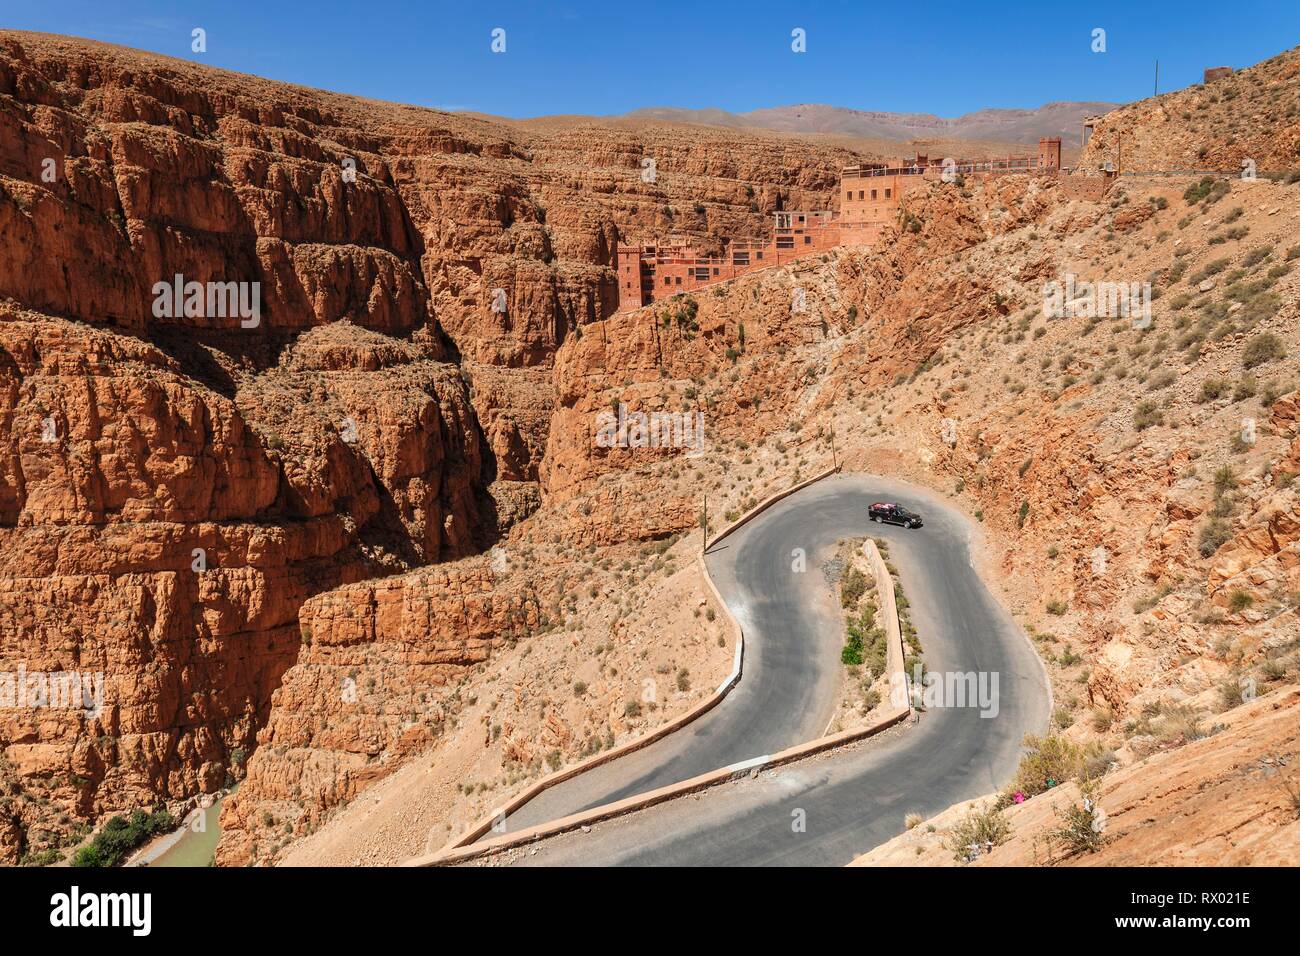 Hotel and restaurant above the Dades Gorge, Atlas, Morocco Stock Photo